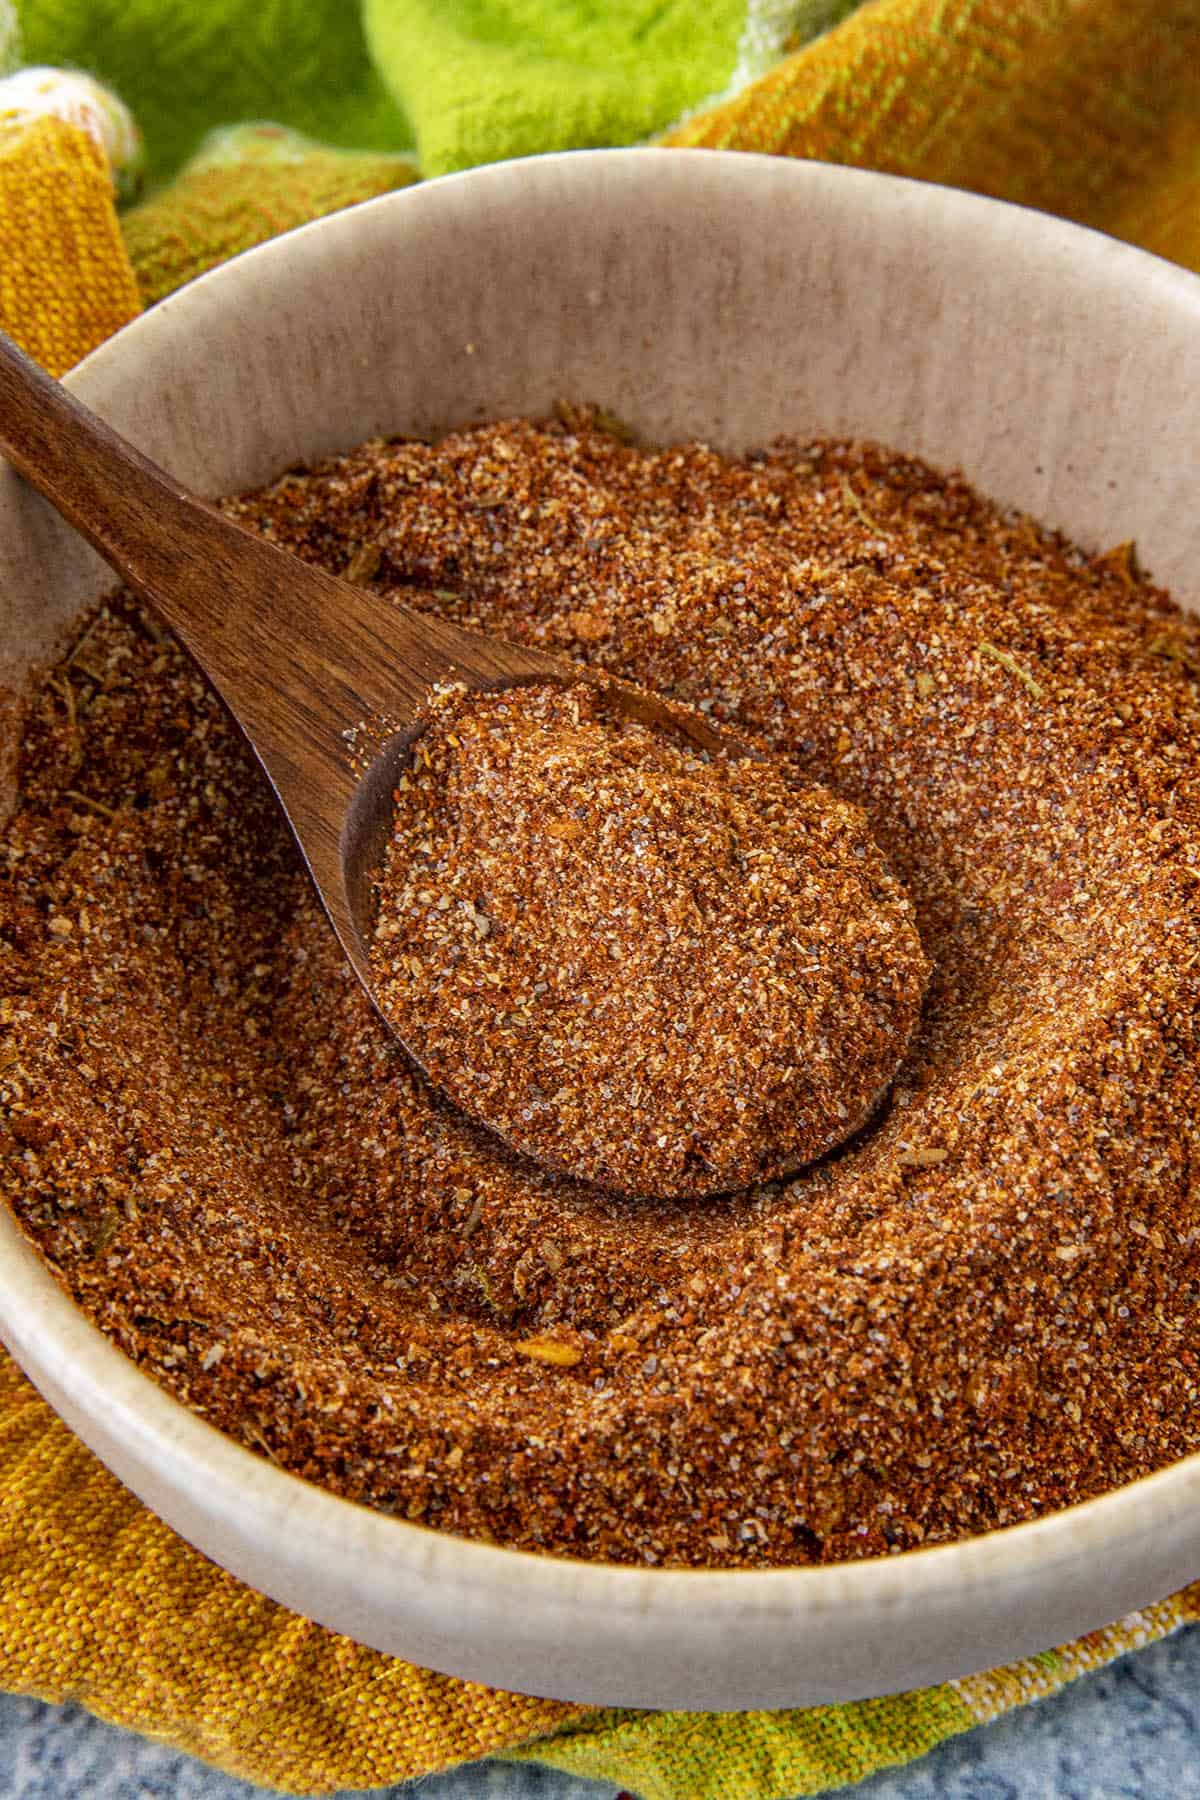 Homemade Taco Seasoning Mix in a bowl, ready for use